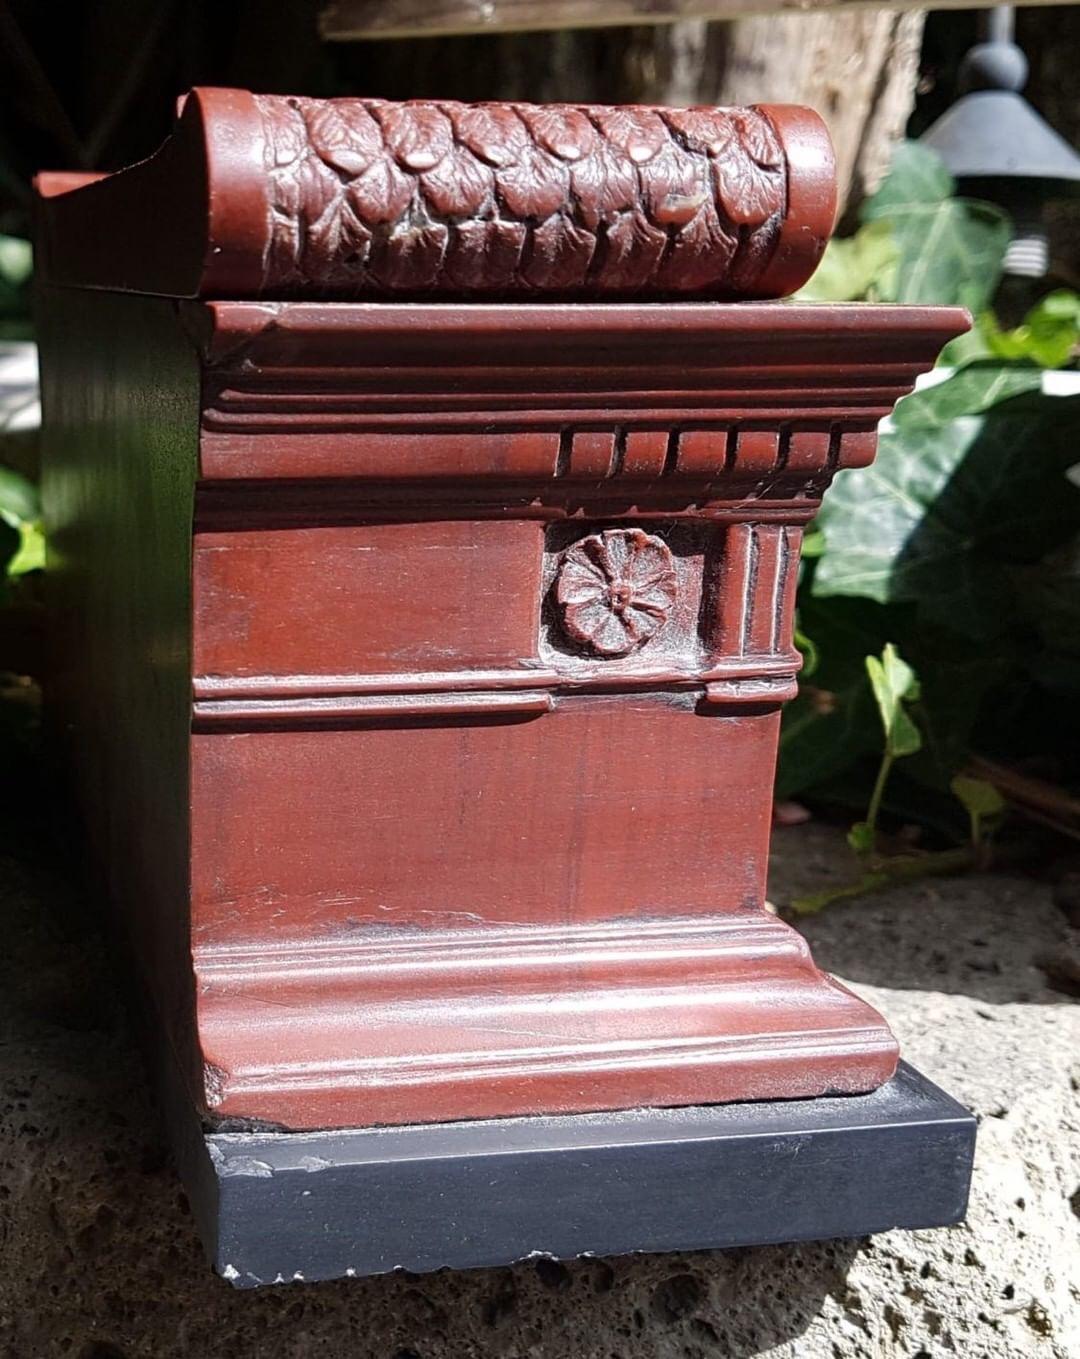 The red marble sarchophagus mounted on a slate base. Removing the top reveals an empty well.